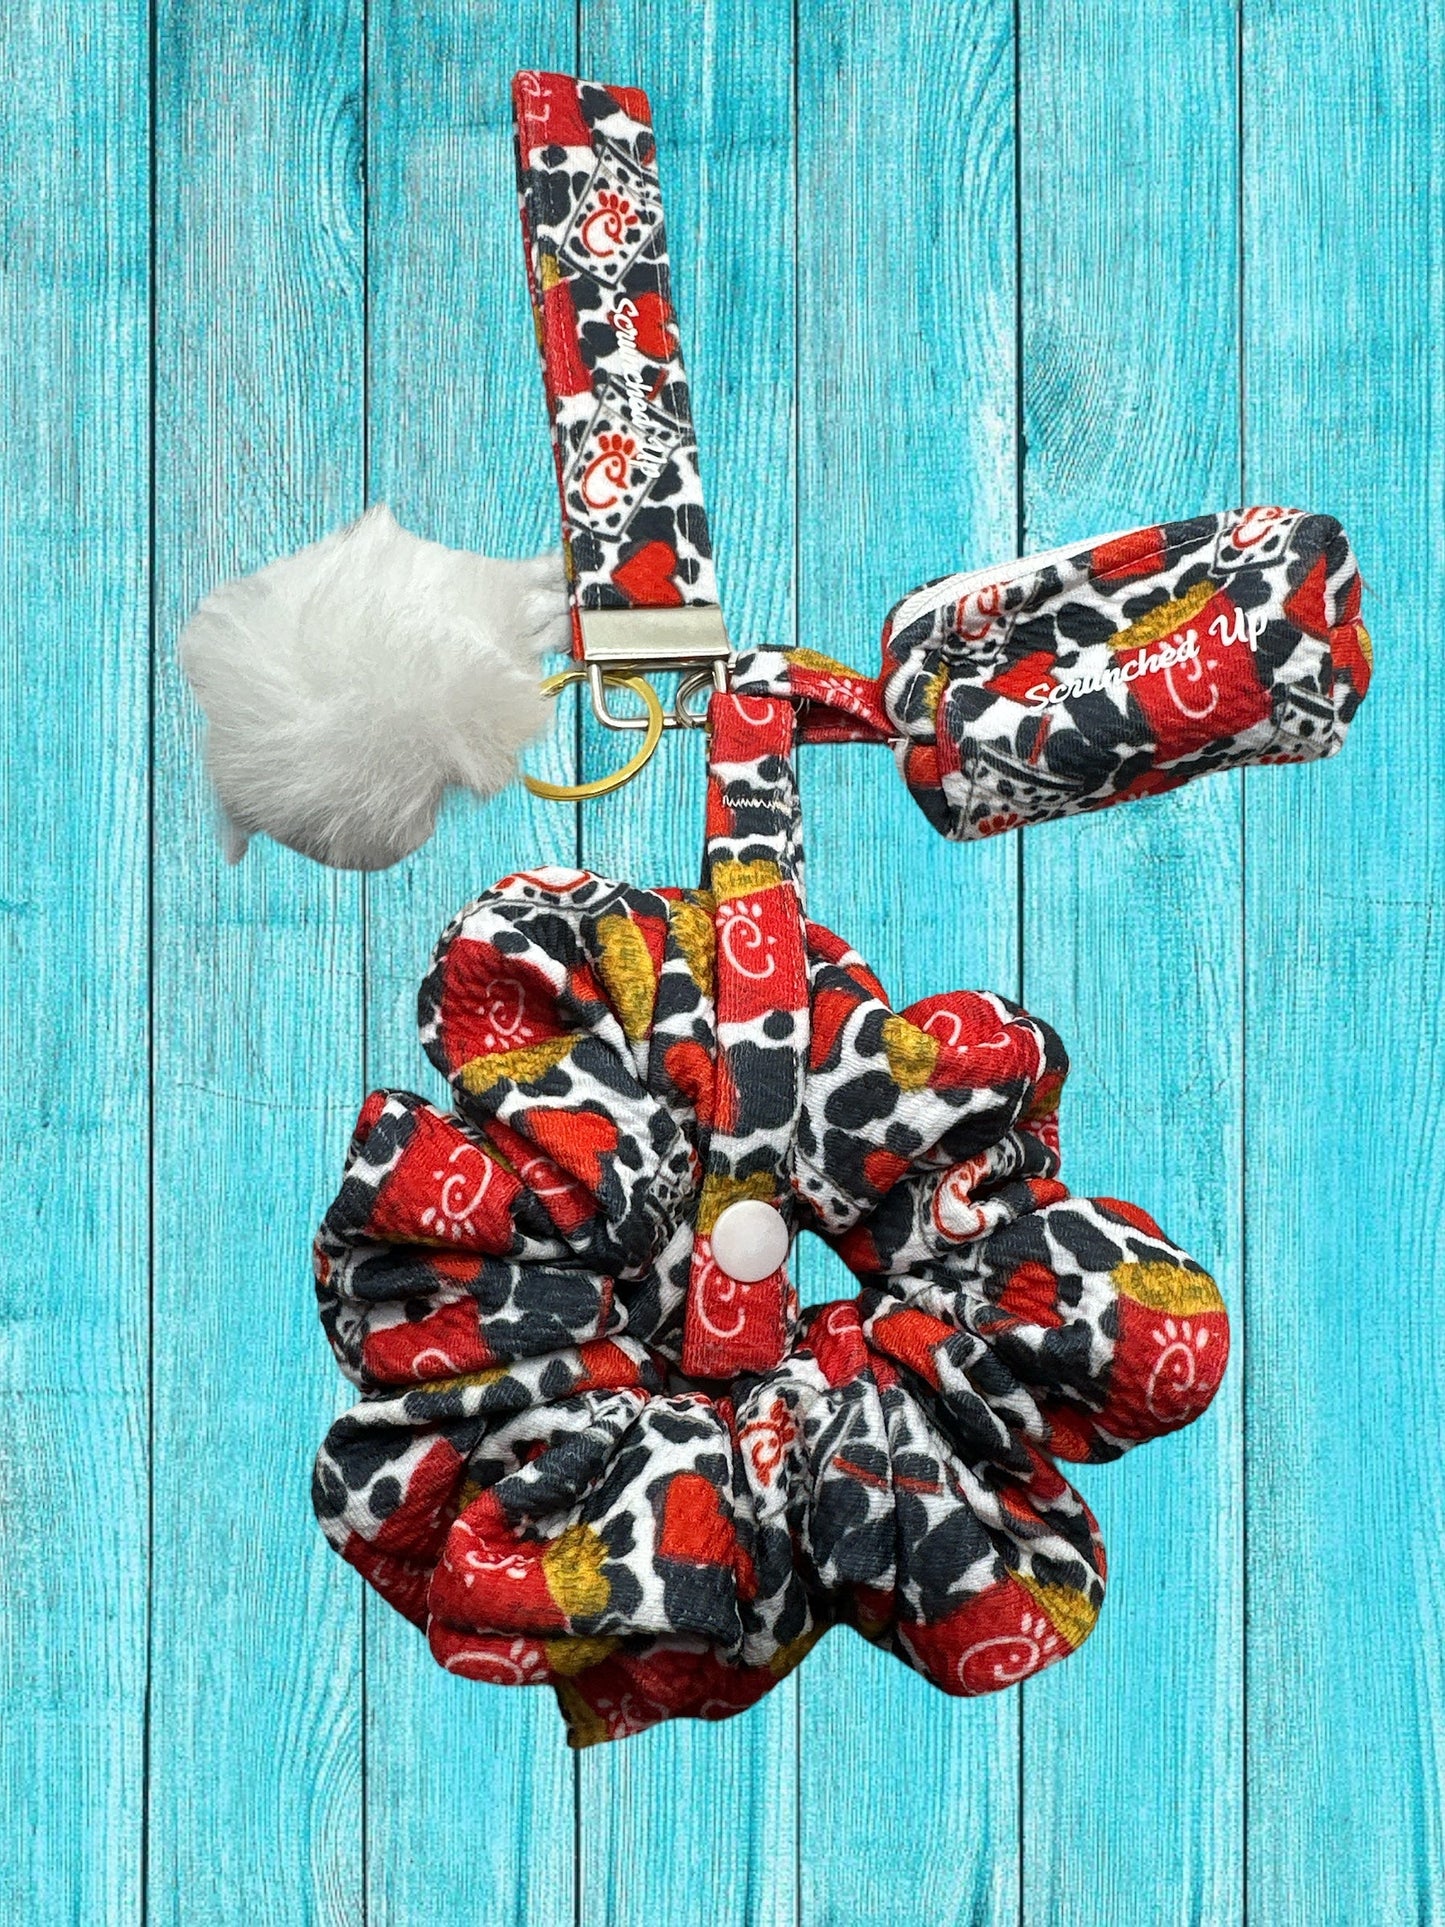 Chick-fil-A Liverpool fabric keychain with detachable scrunchie